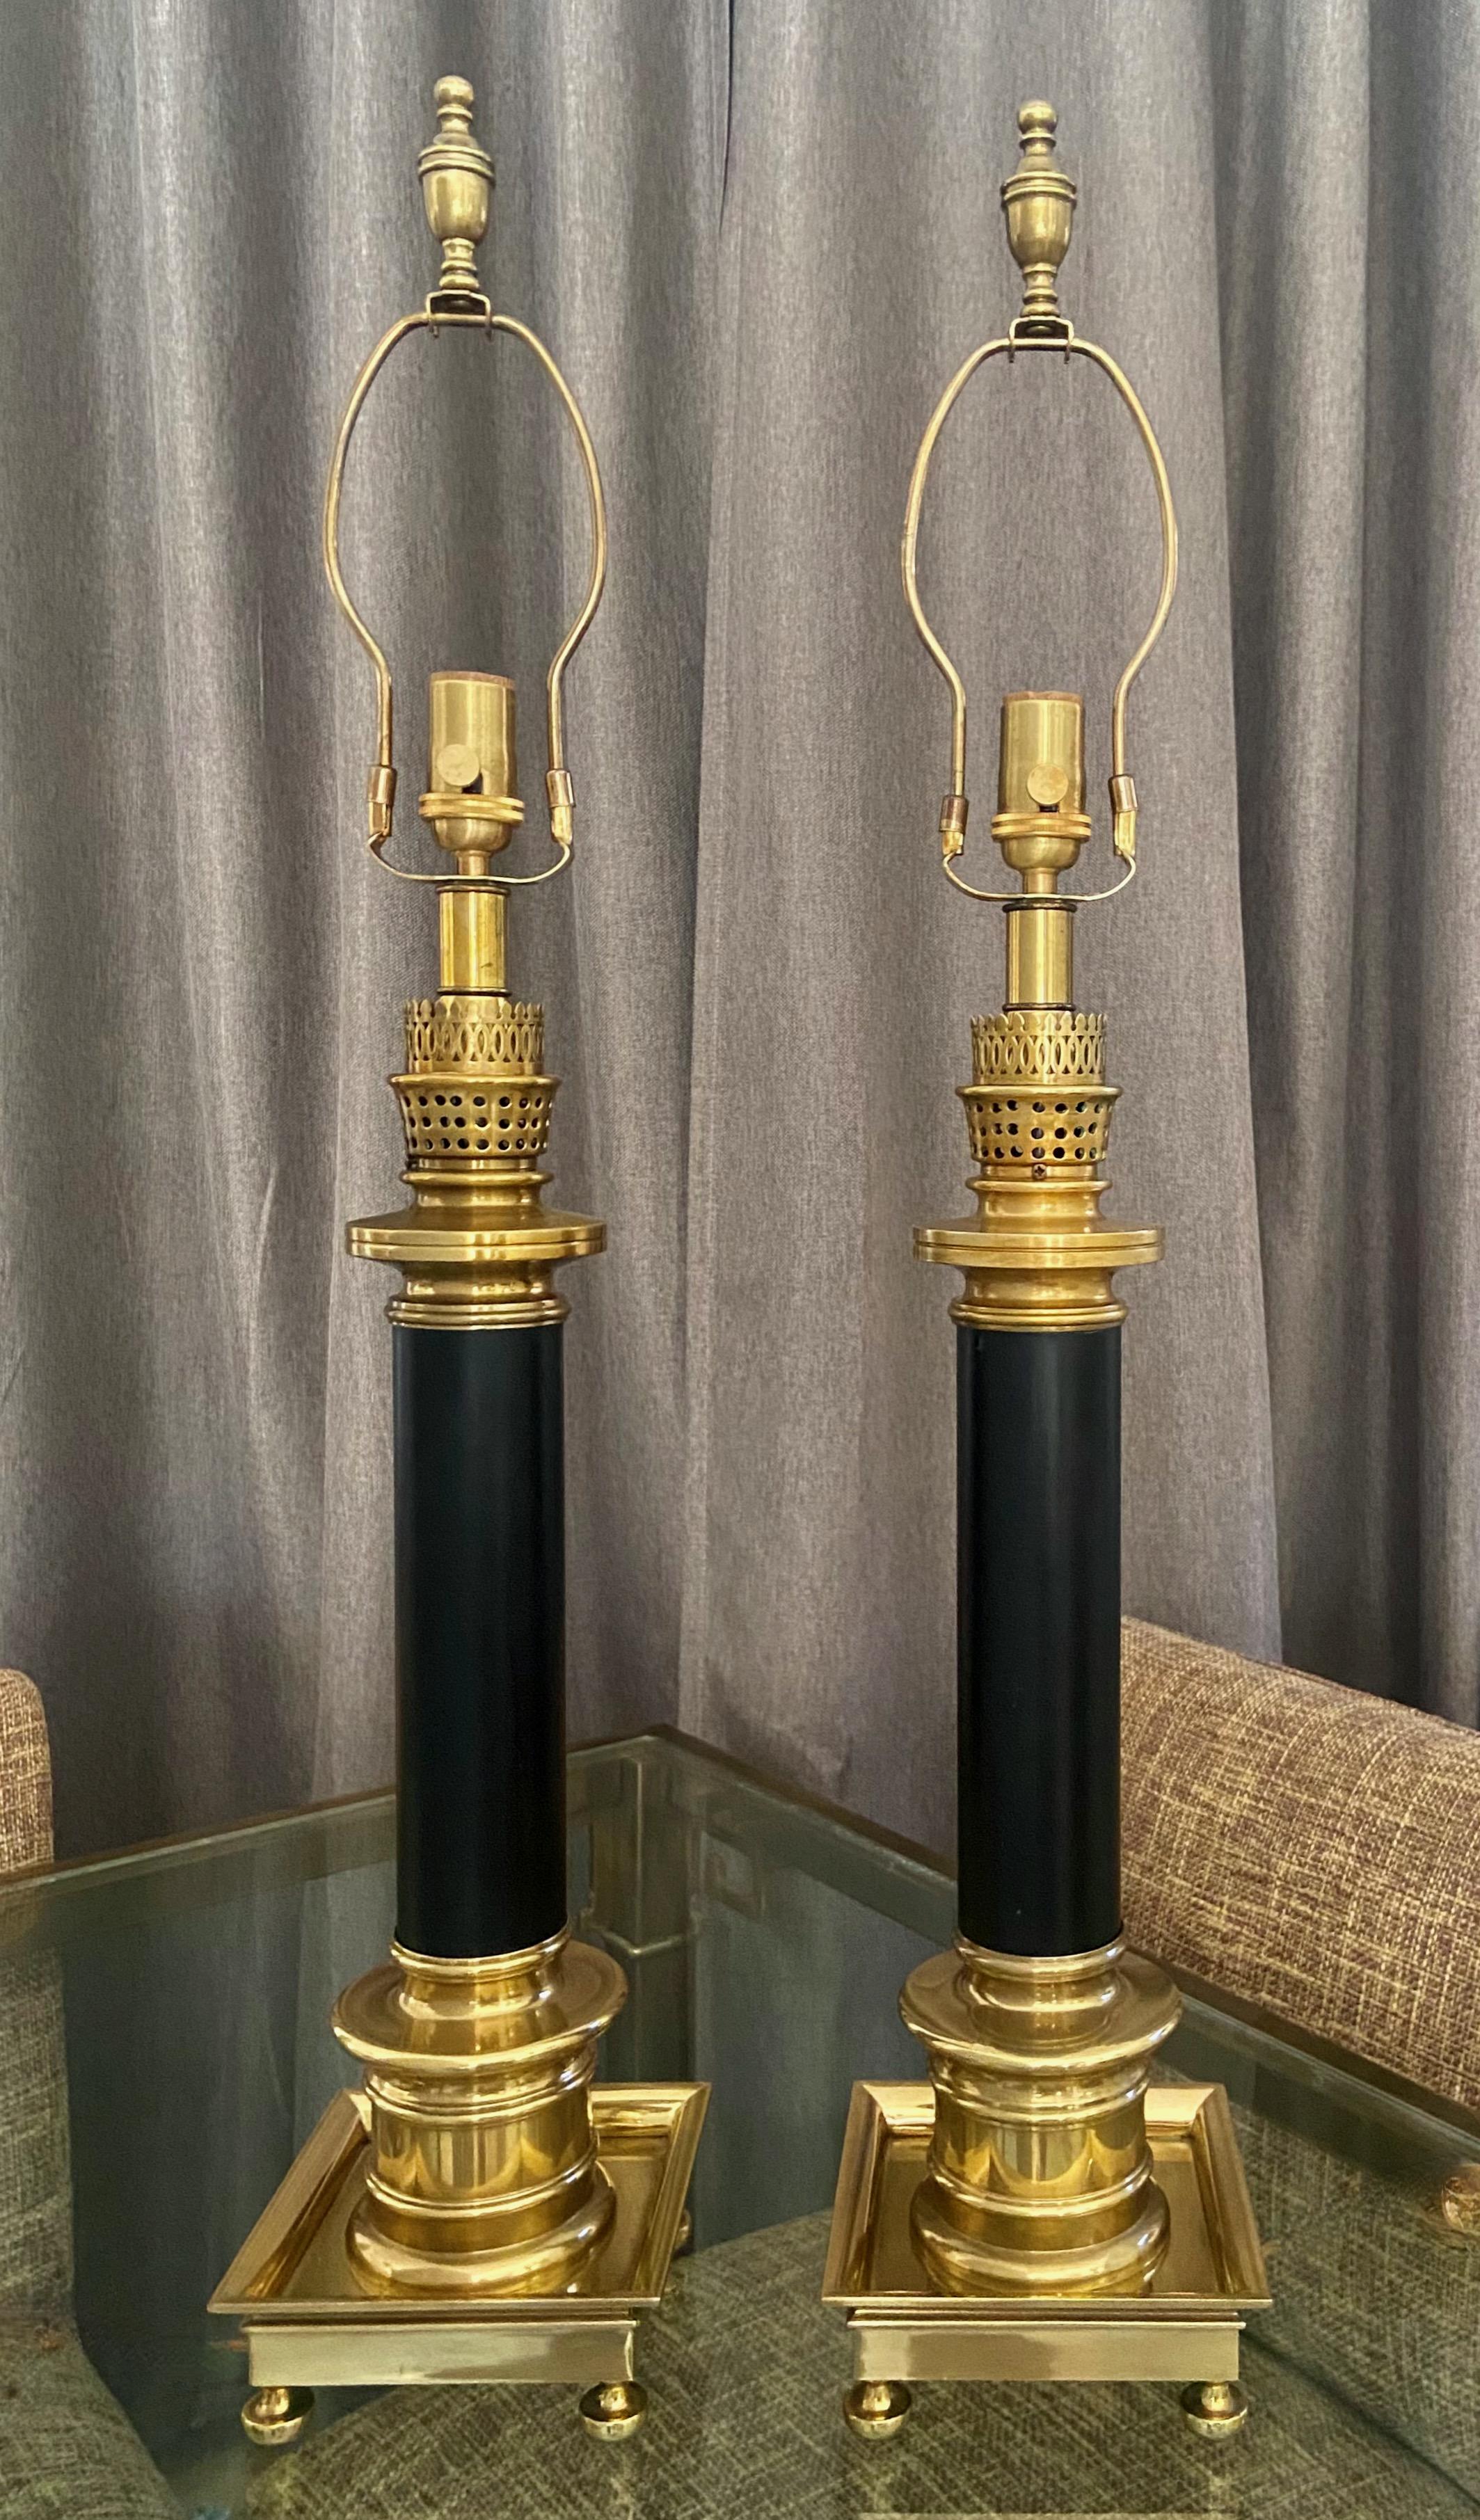 Pair of large solid brass and black painted column table lamps by Frederick Copper for Fitz & Floyd. New three-way brass sockets. Includes original harps and finials. (Frederick Copper label appeared on replaced sockets.) 
Measures: Height to top